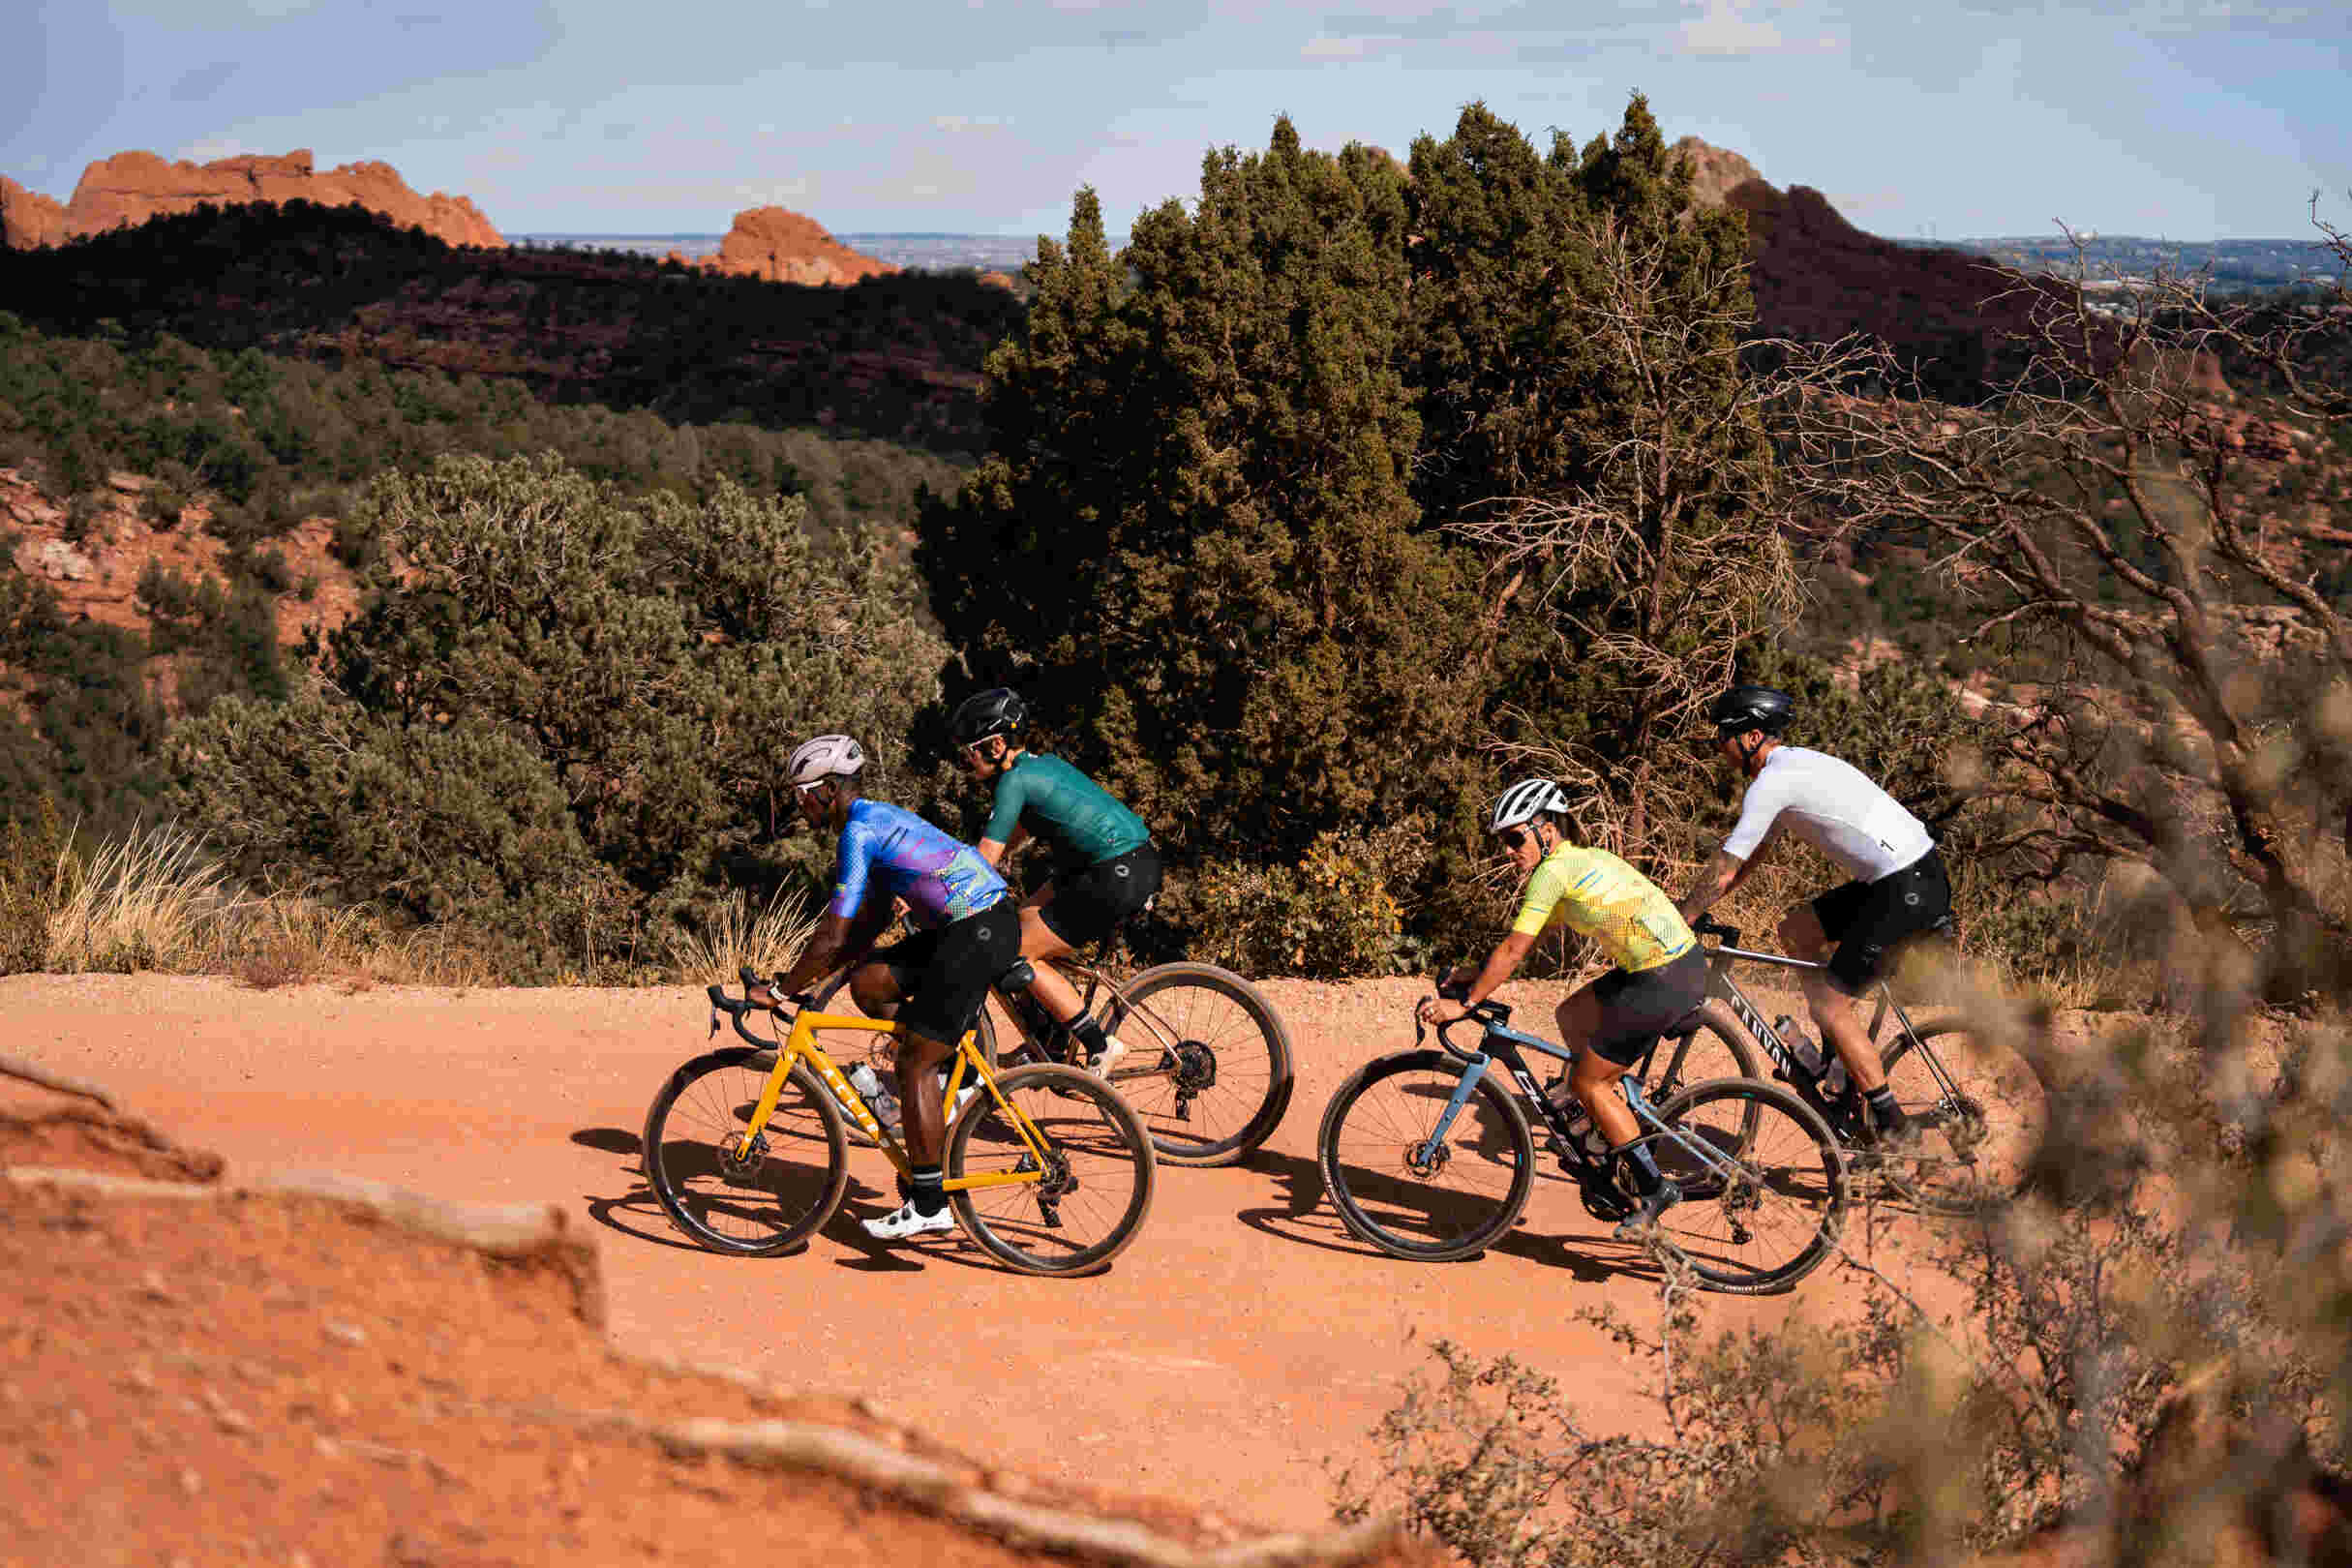 Group of Cyclists Gravel Riding in Colorado